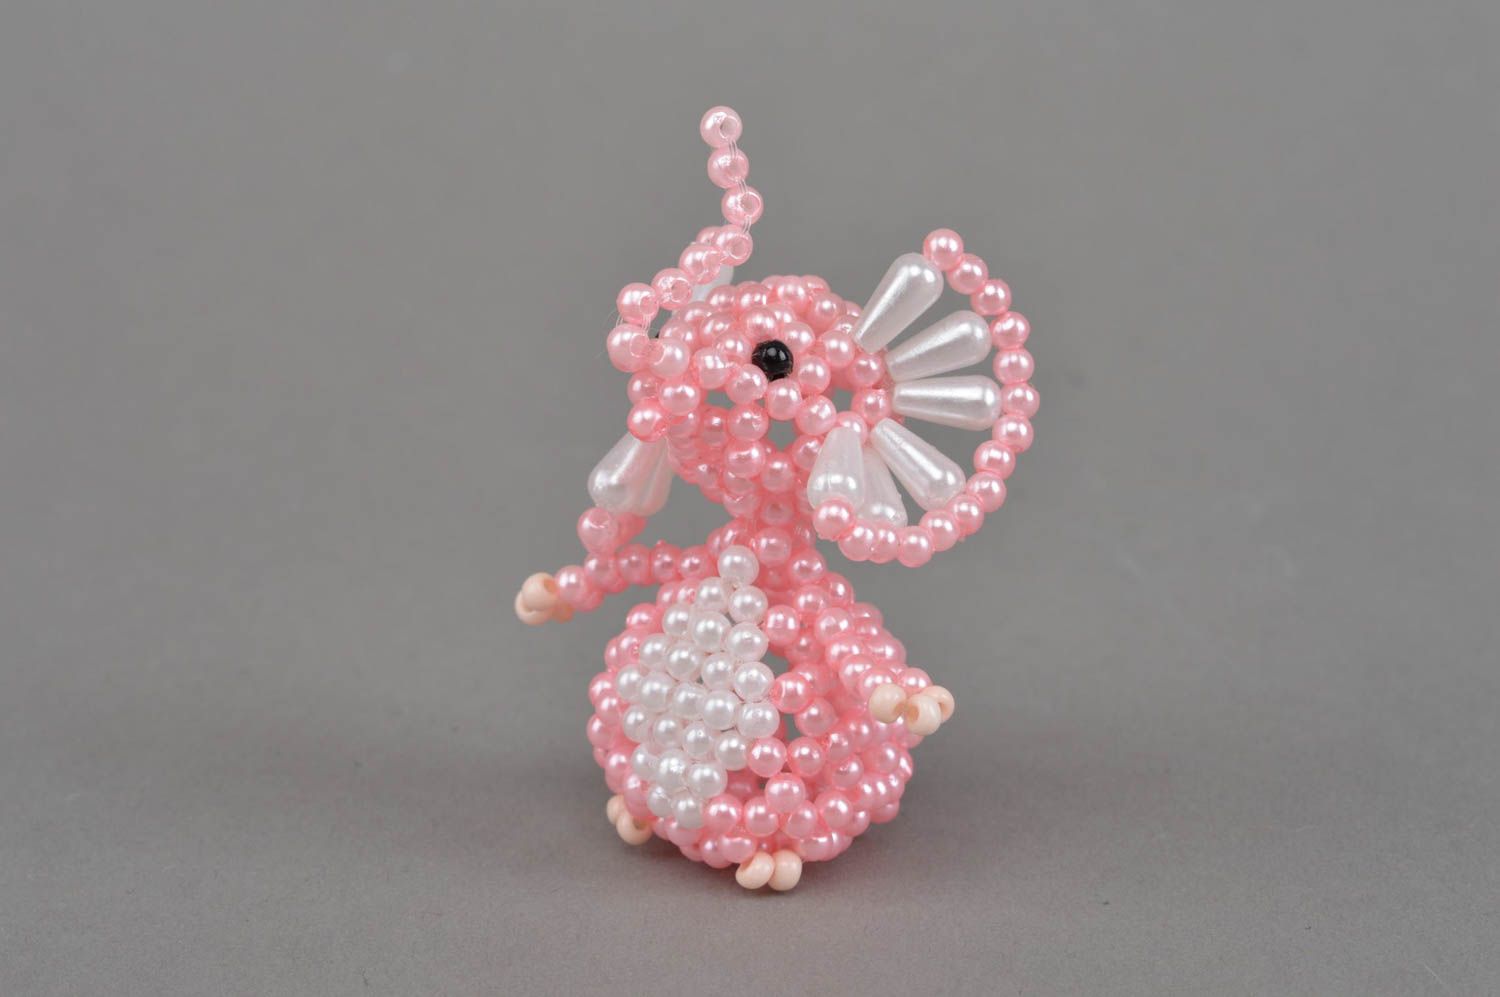 Small homemade collectible handmade beaded statuette of pink elephant for decor photo 2